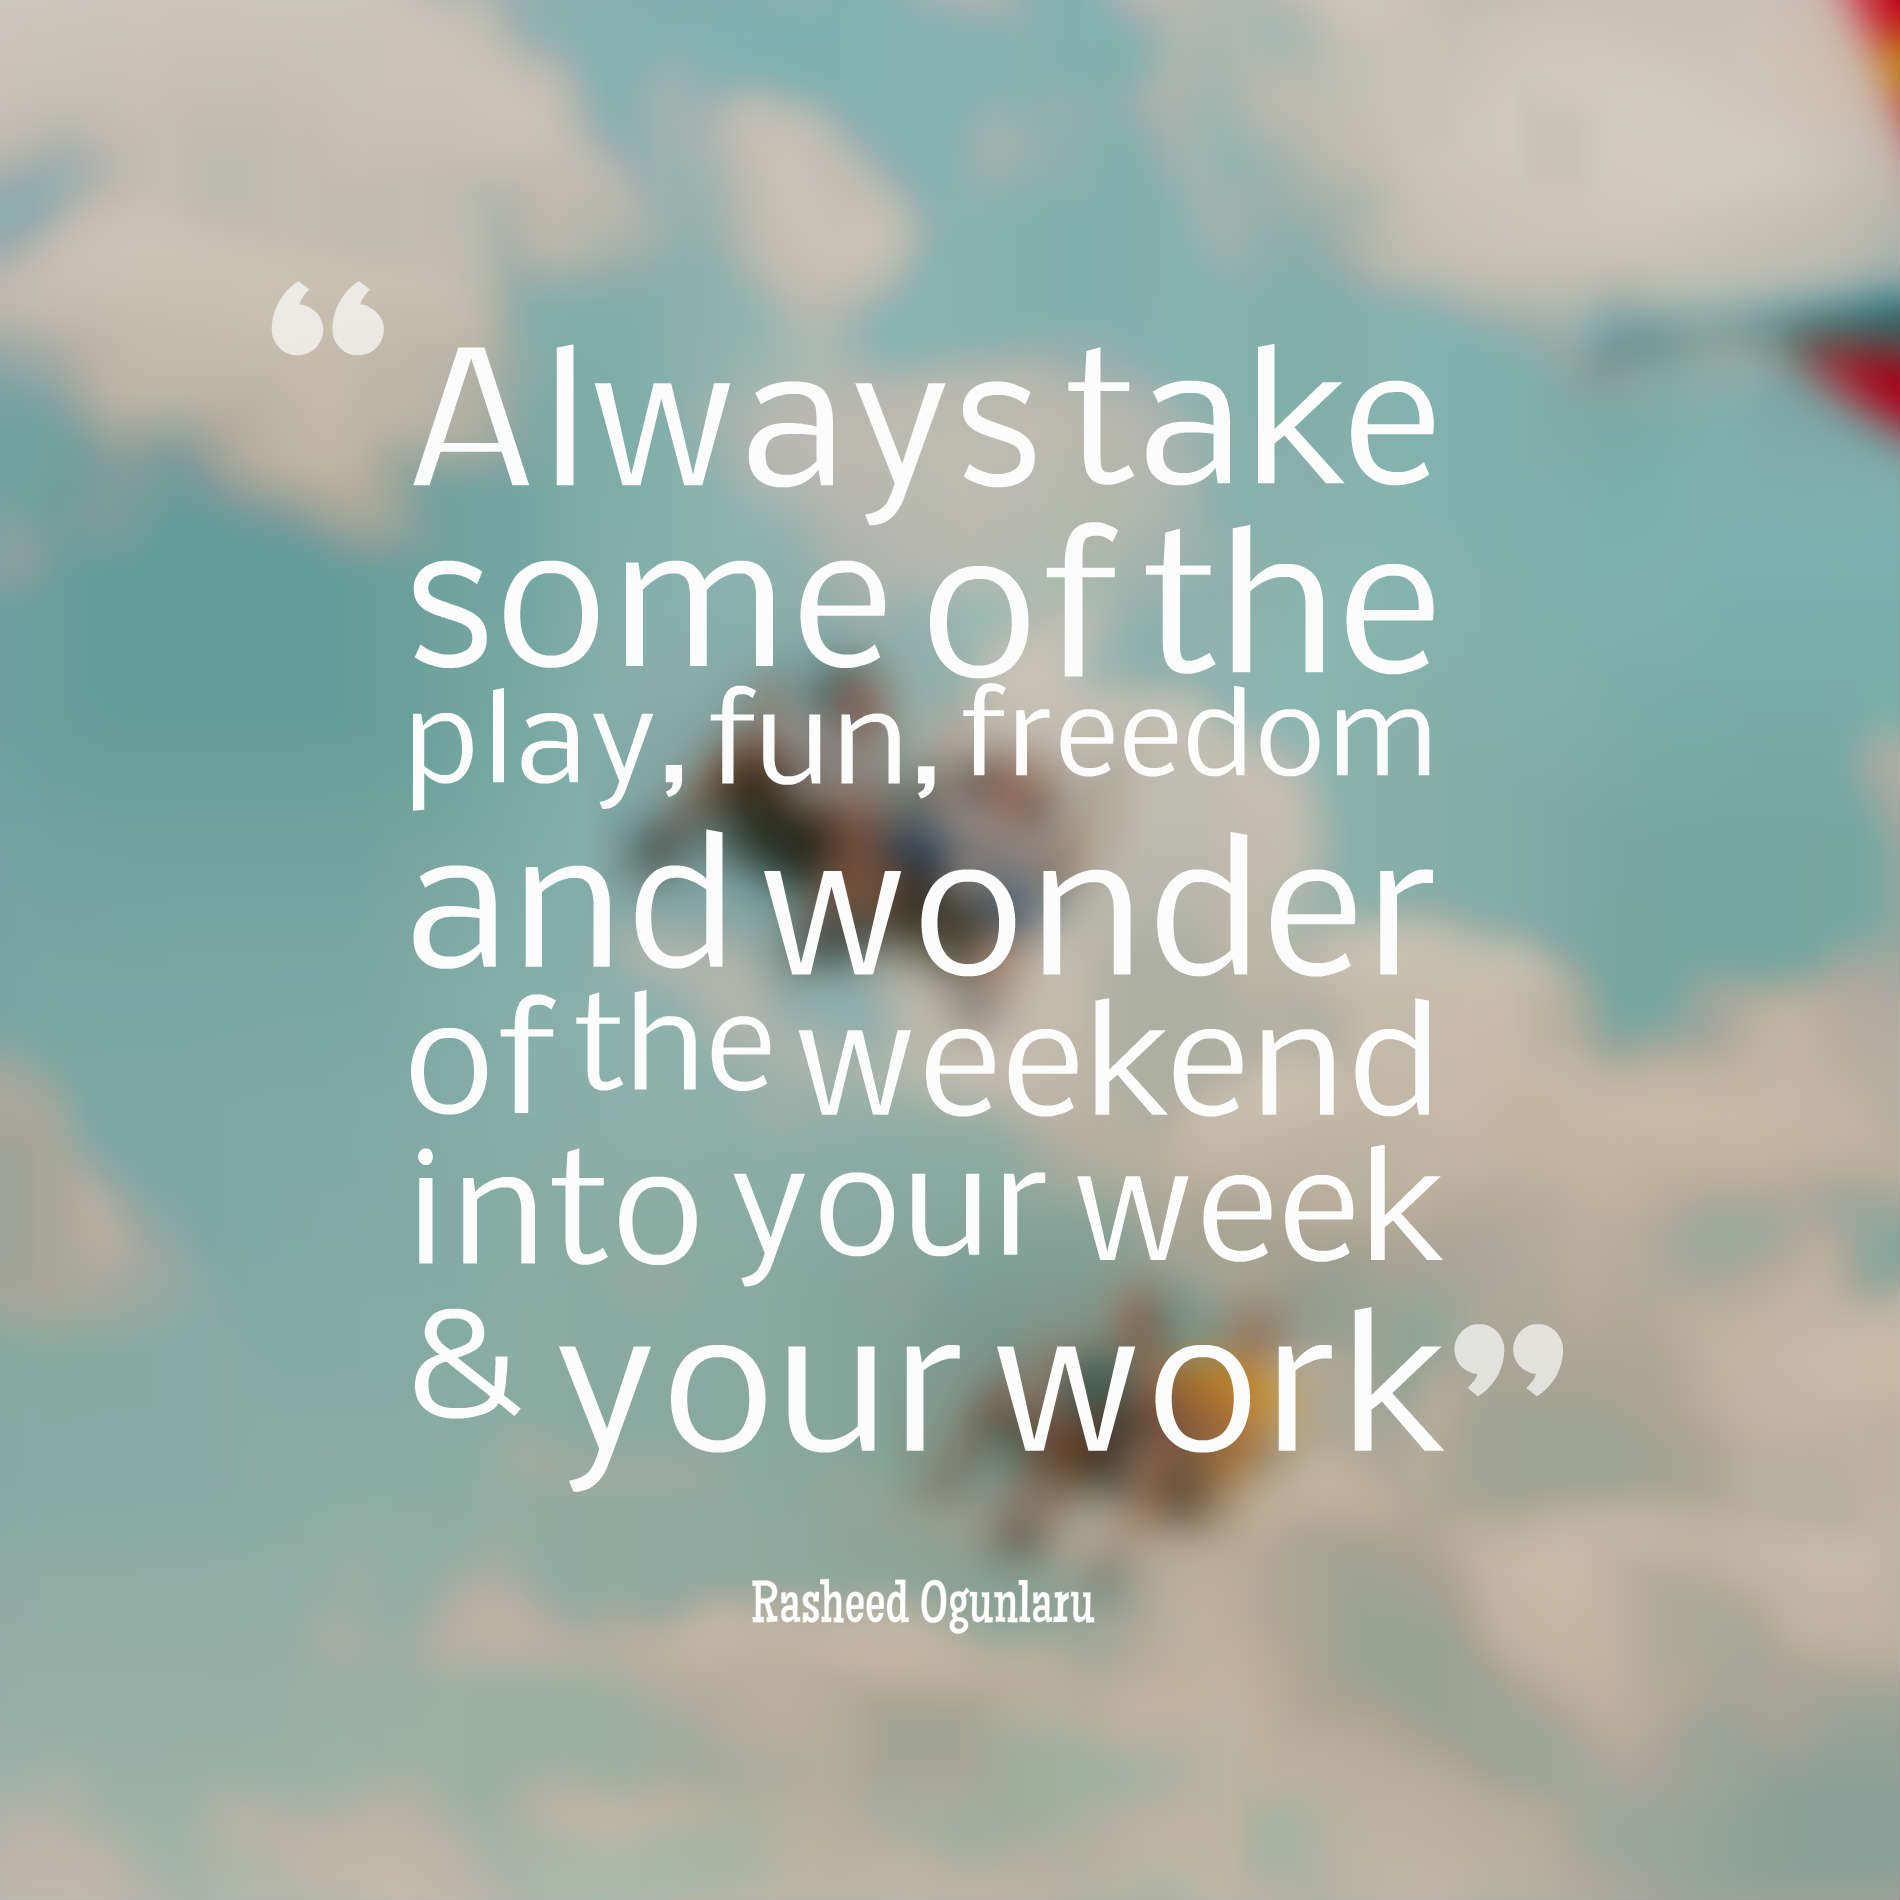 Always take some of the play, fun, freedom and wonder of the weekend into your week & your work